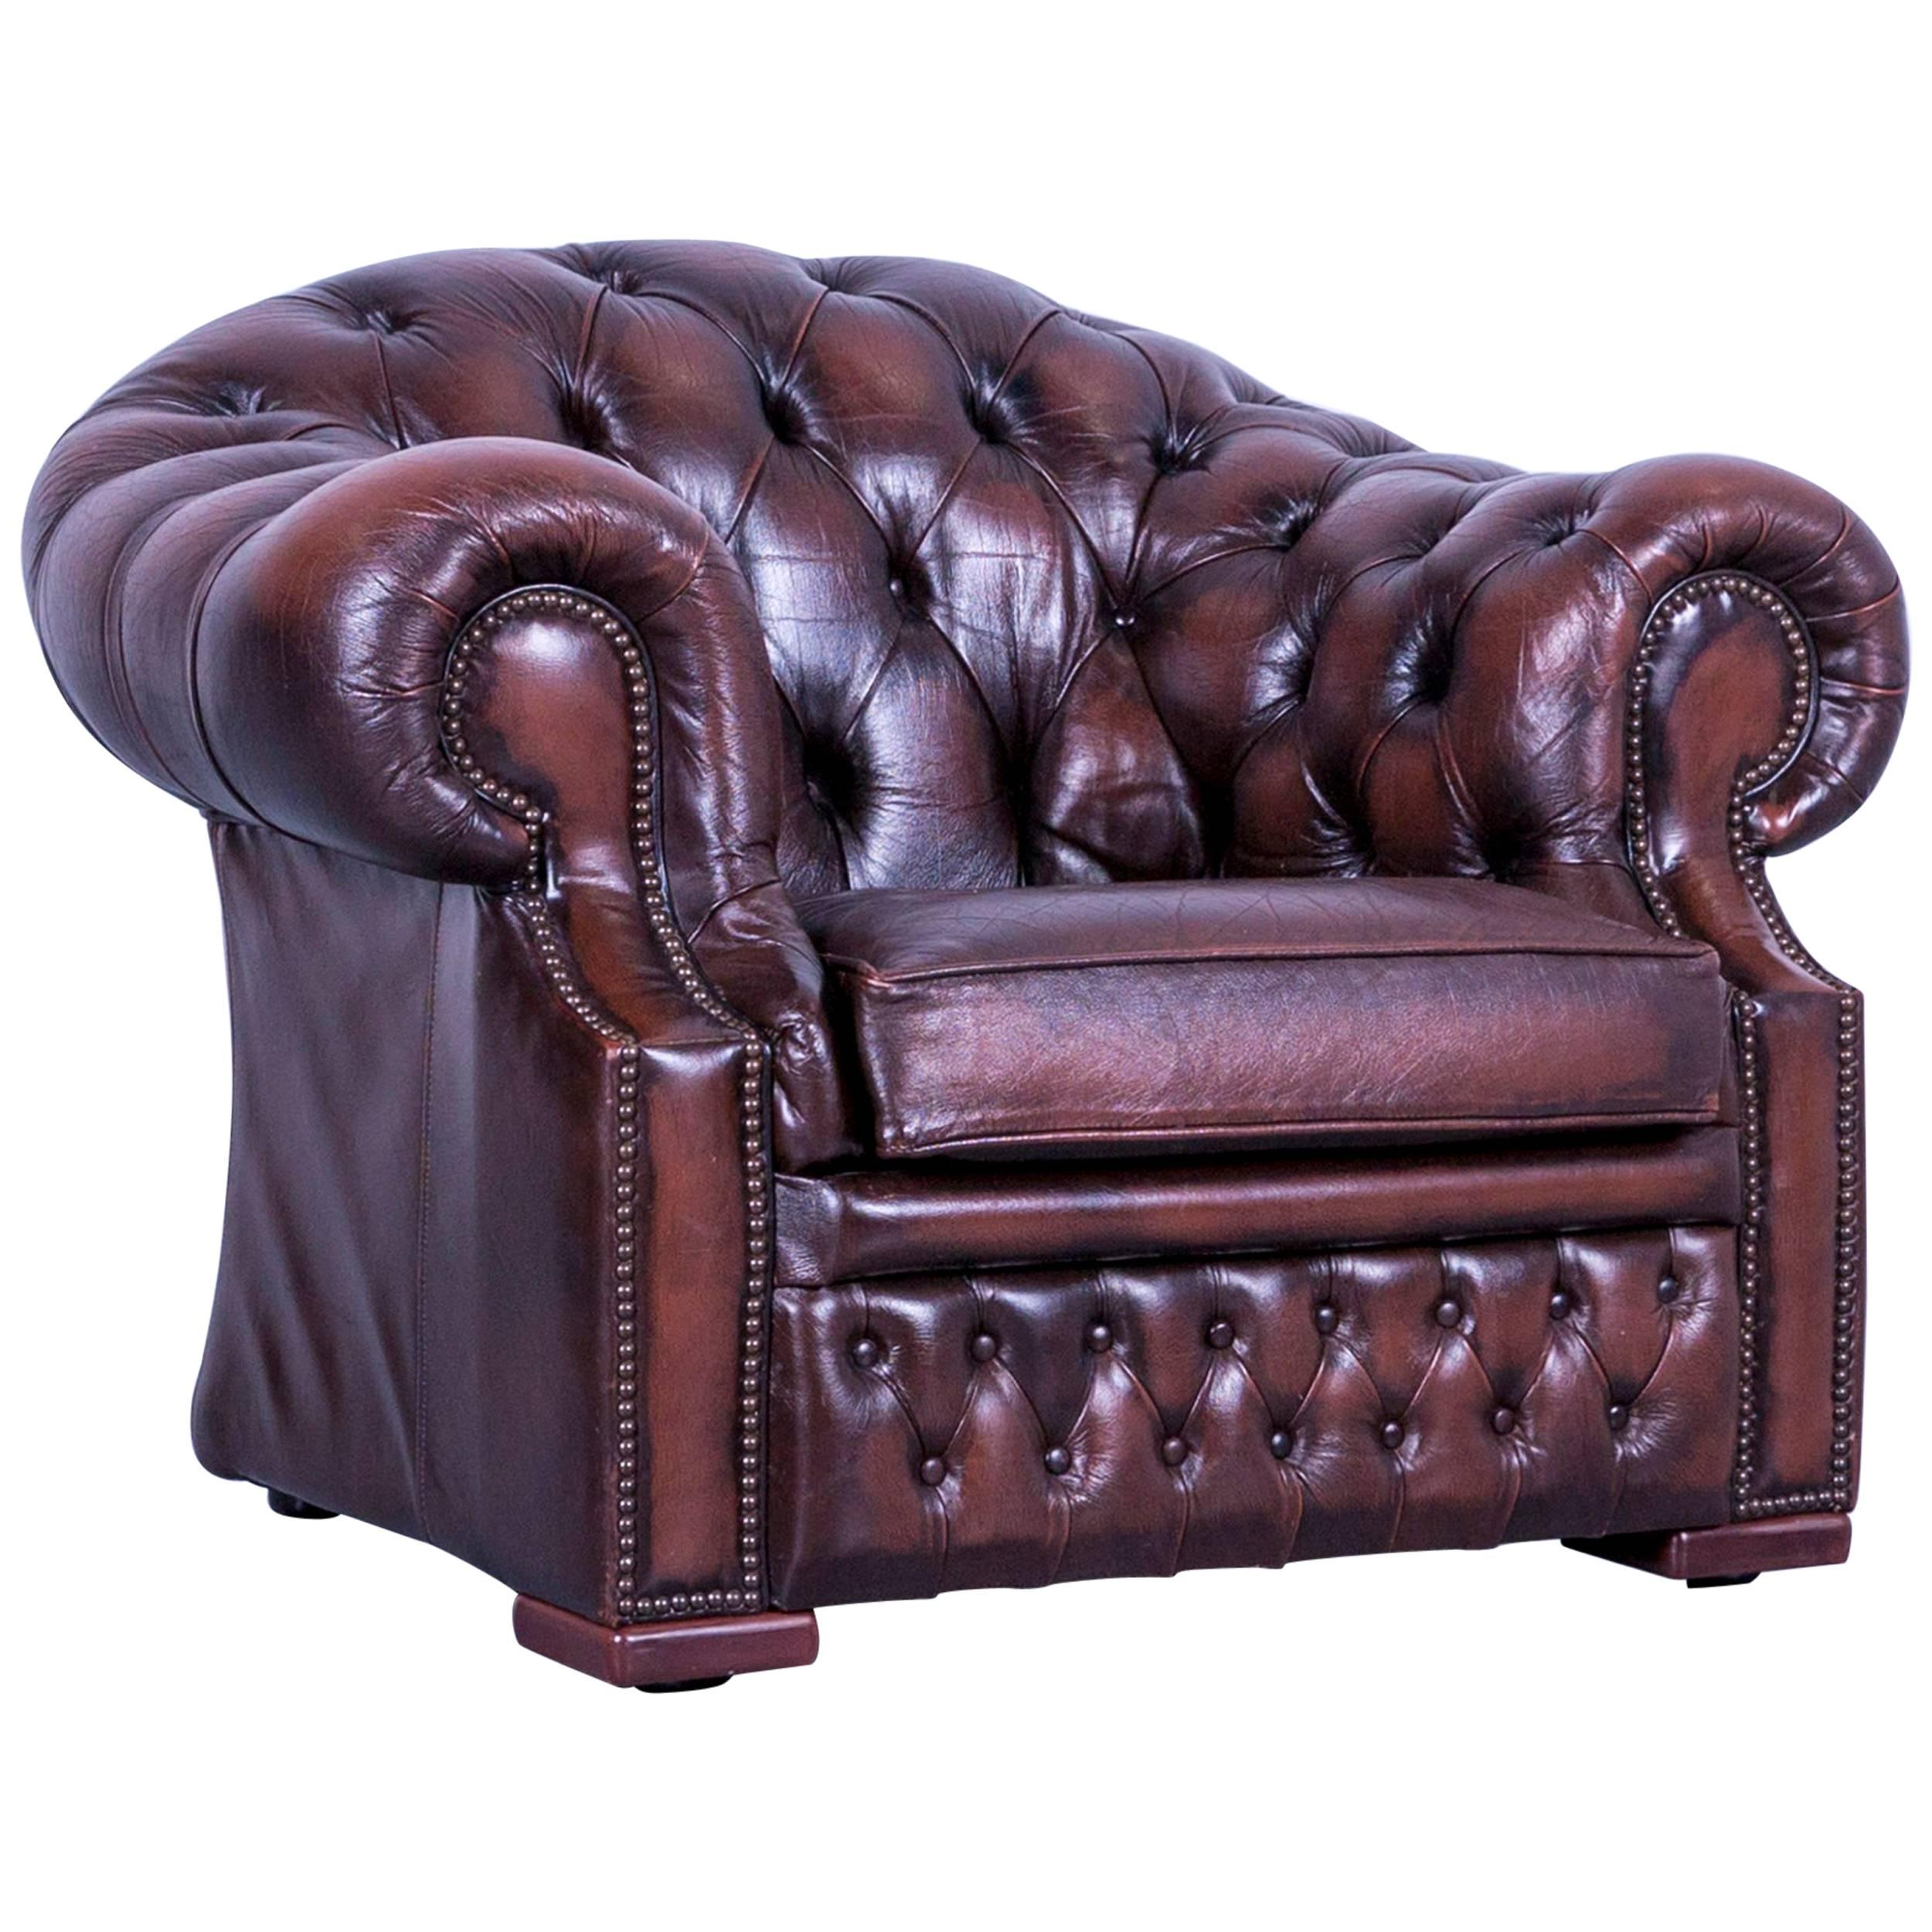 Chesterfield Centurion Leather Armchair Brown One-Seat